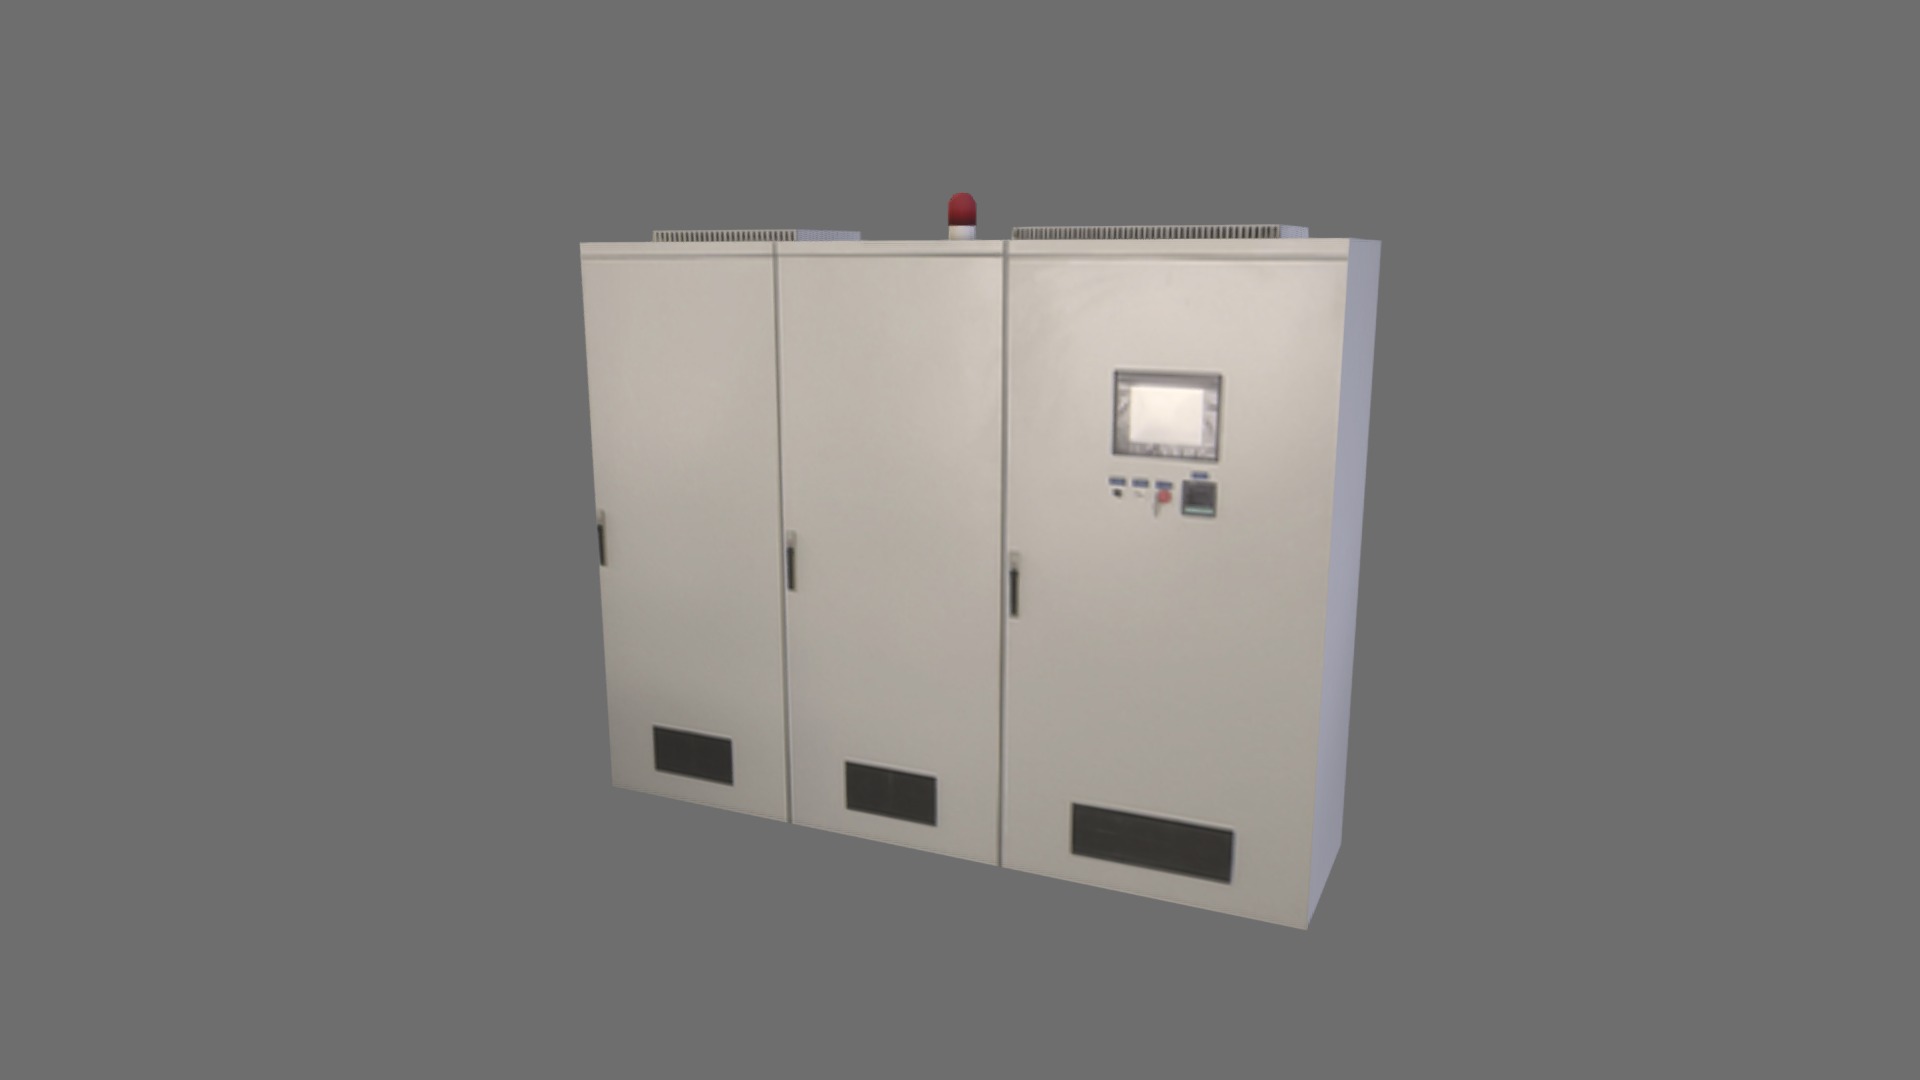 3D model Electrical cabinet 05 - This is a 3D model of the Electrical cabinet 05. The 3D model is about a white rectangular object with a red light on top.